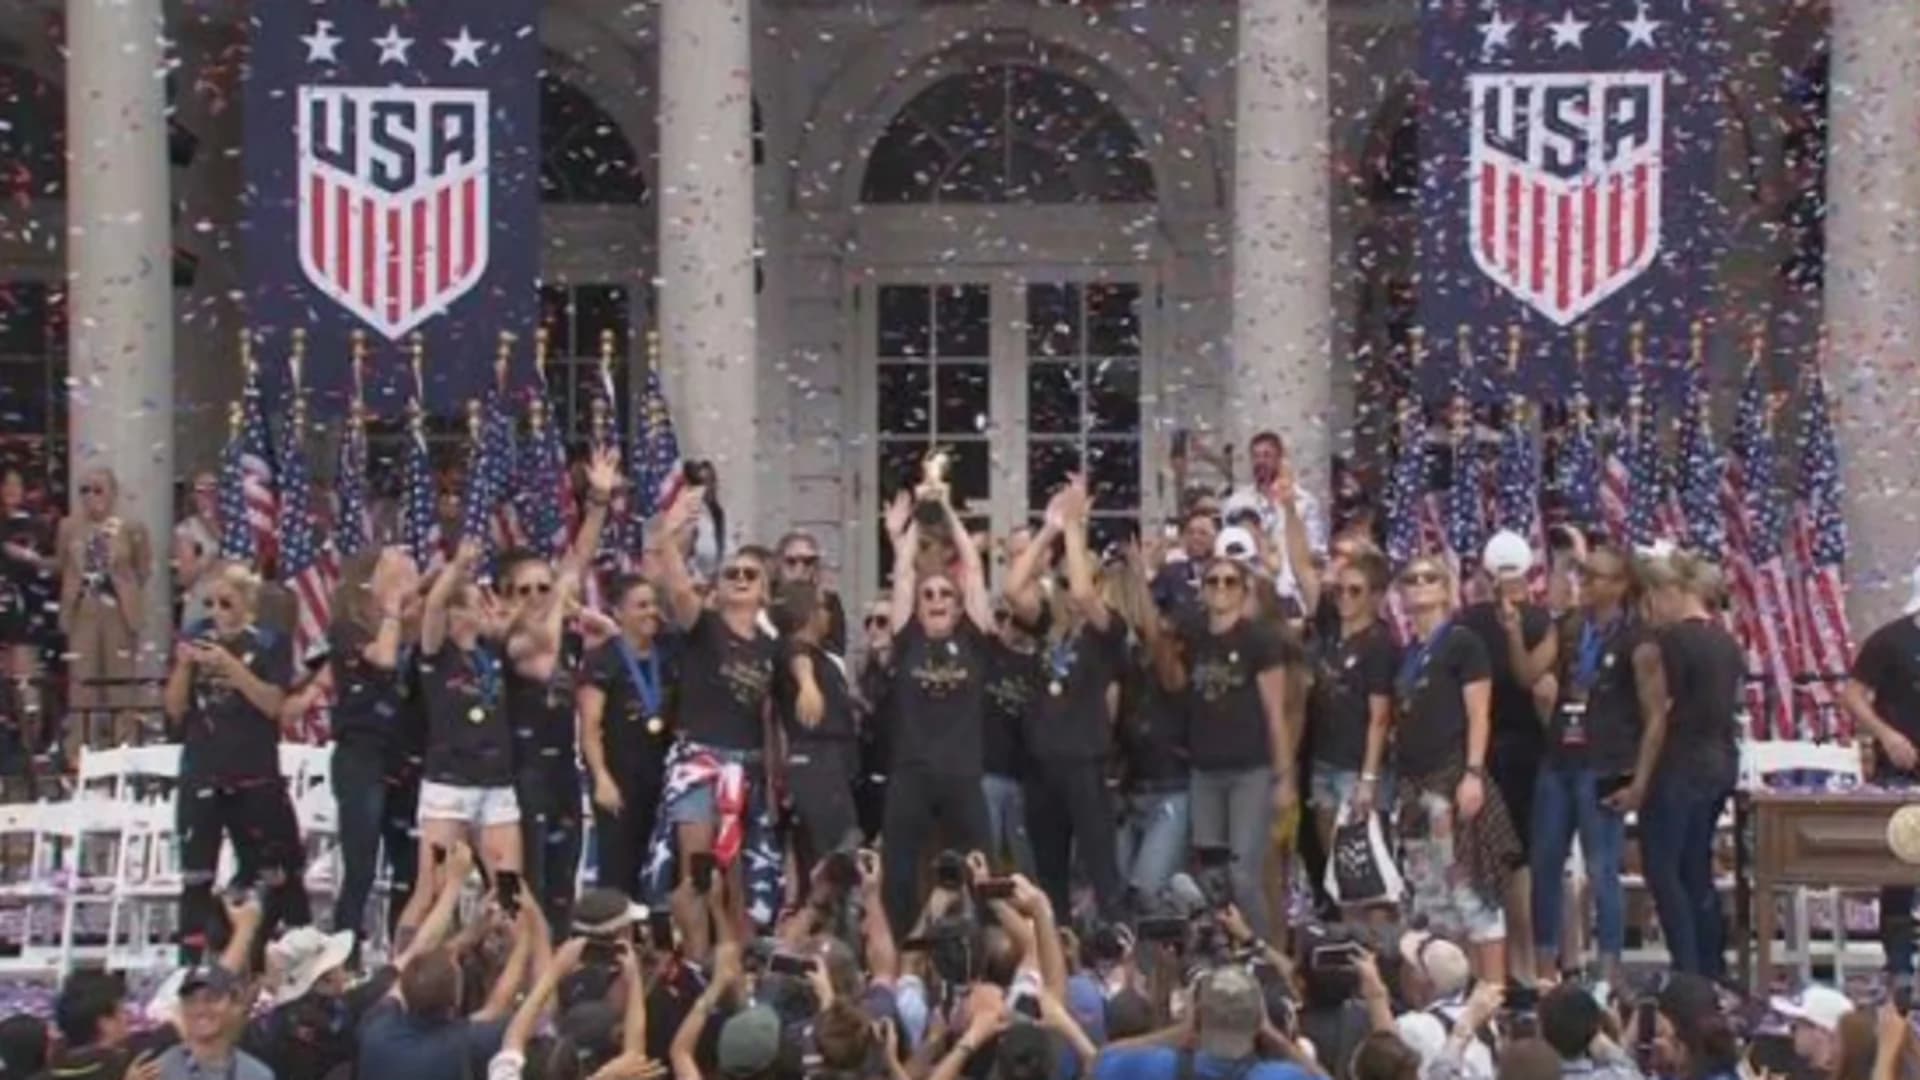 Extended coverage - NYC honors US Women's National Team with parade, ceremony